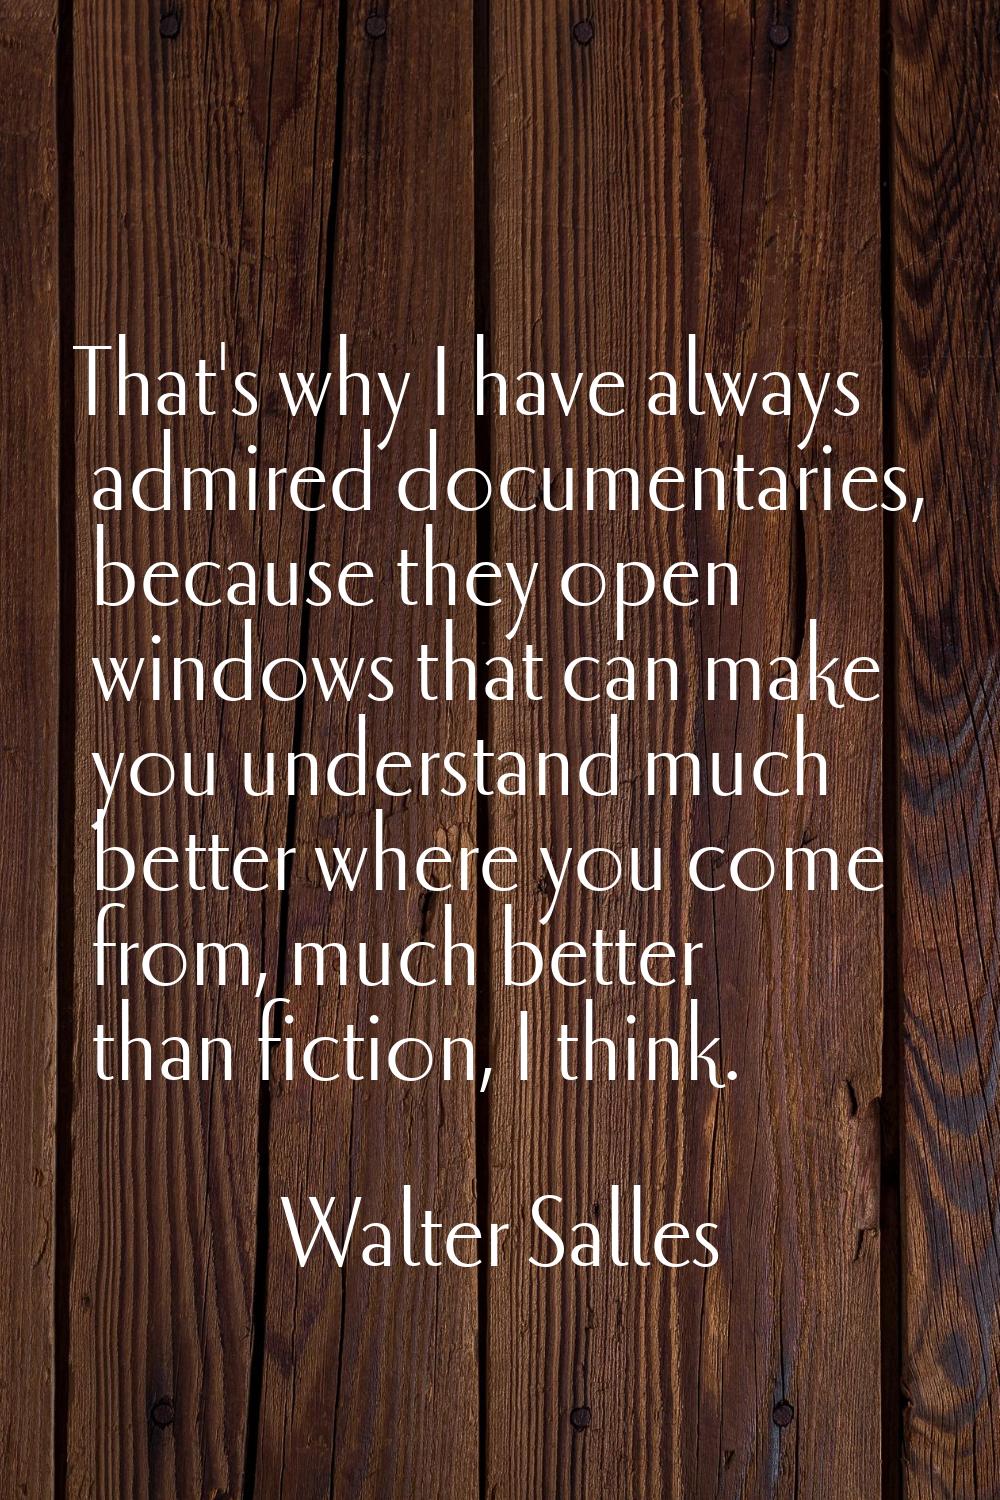 That's why I have always admired documentaries, because they open windows that can make you underst